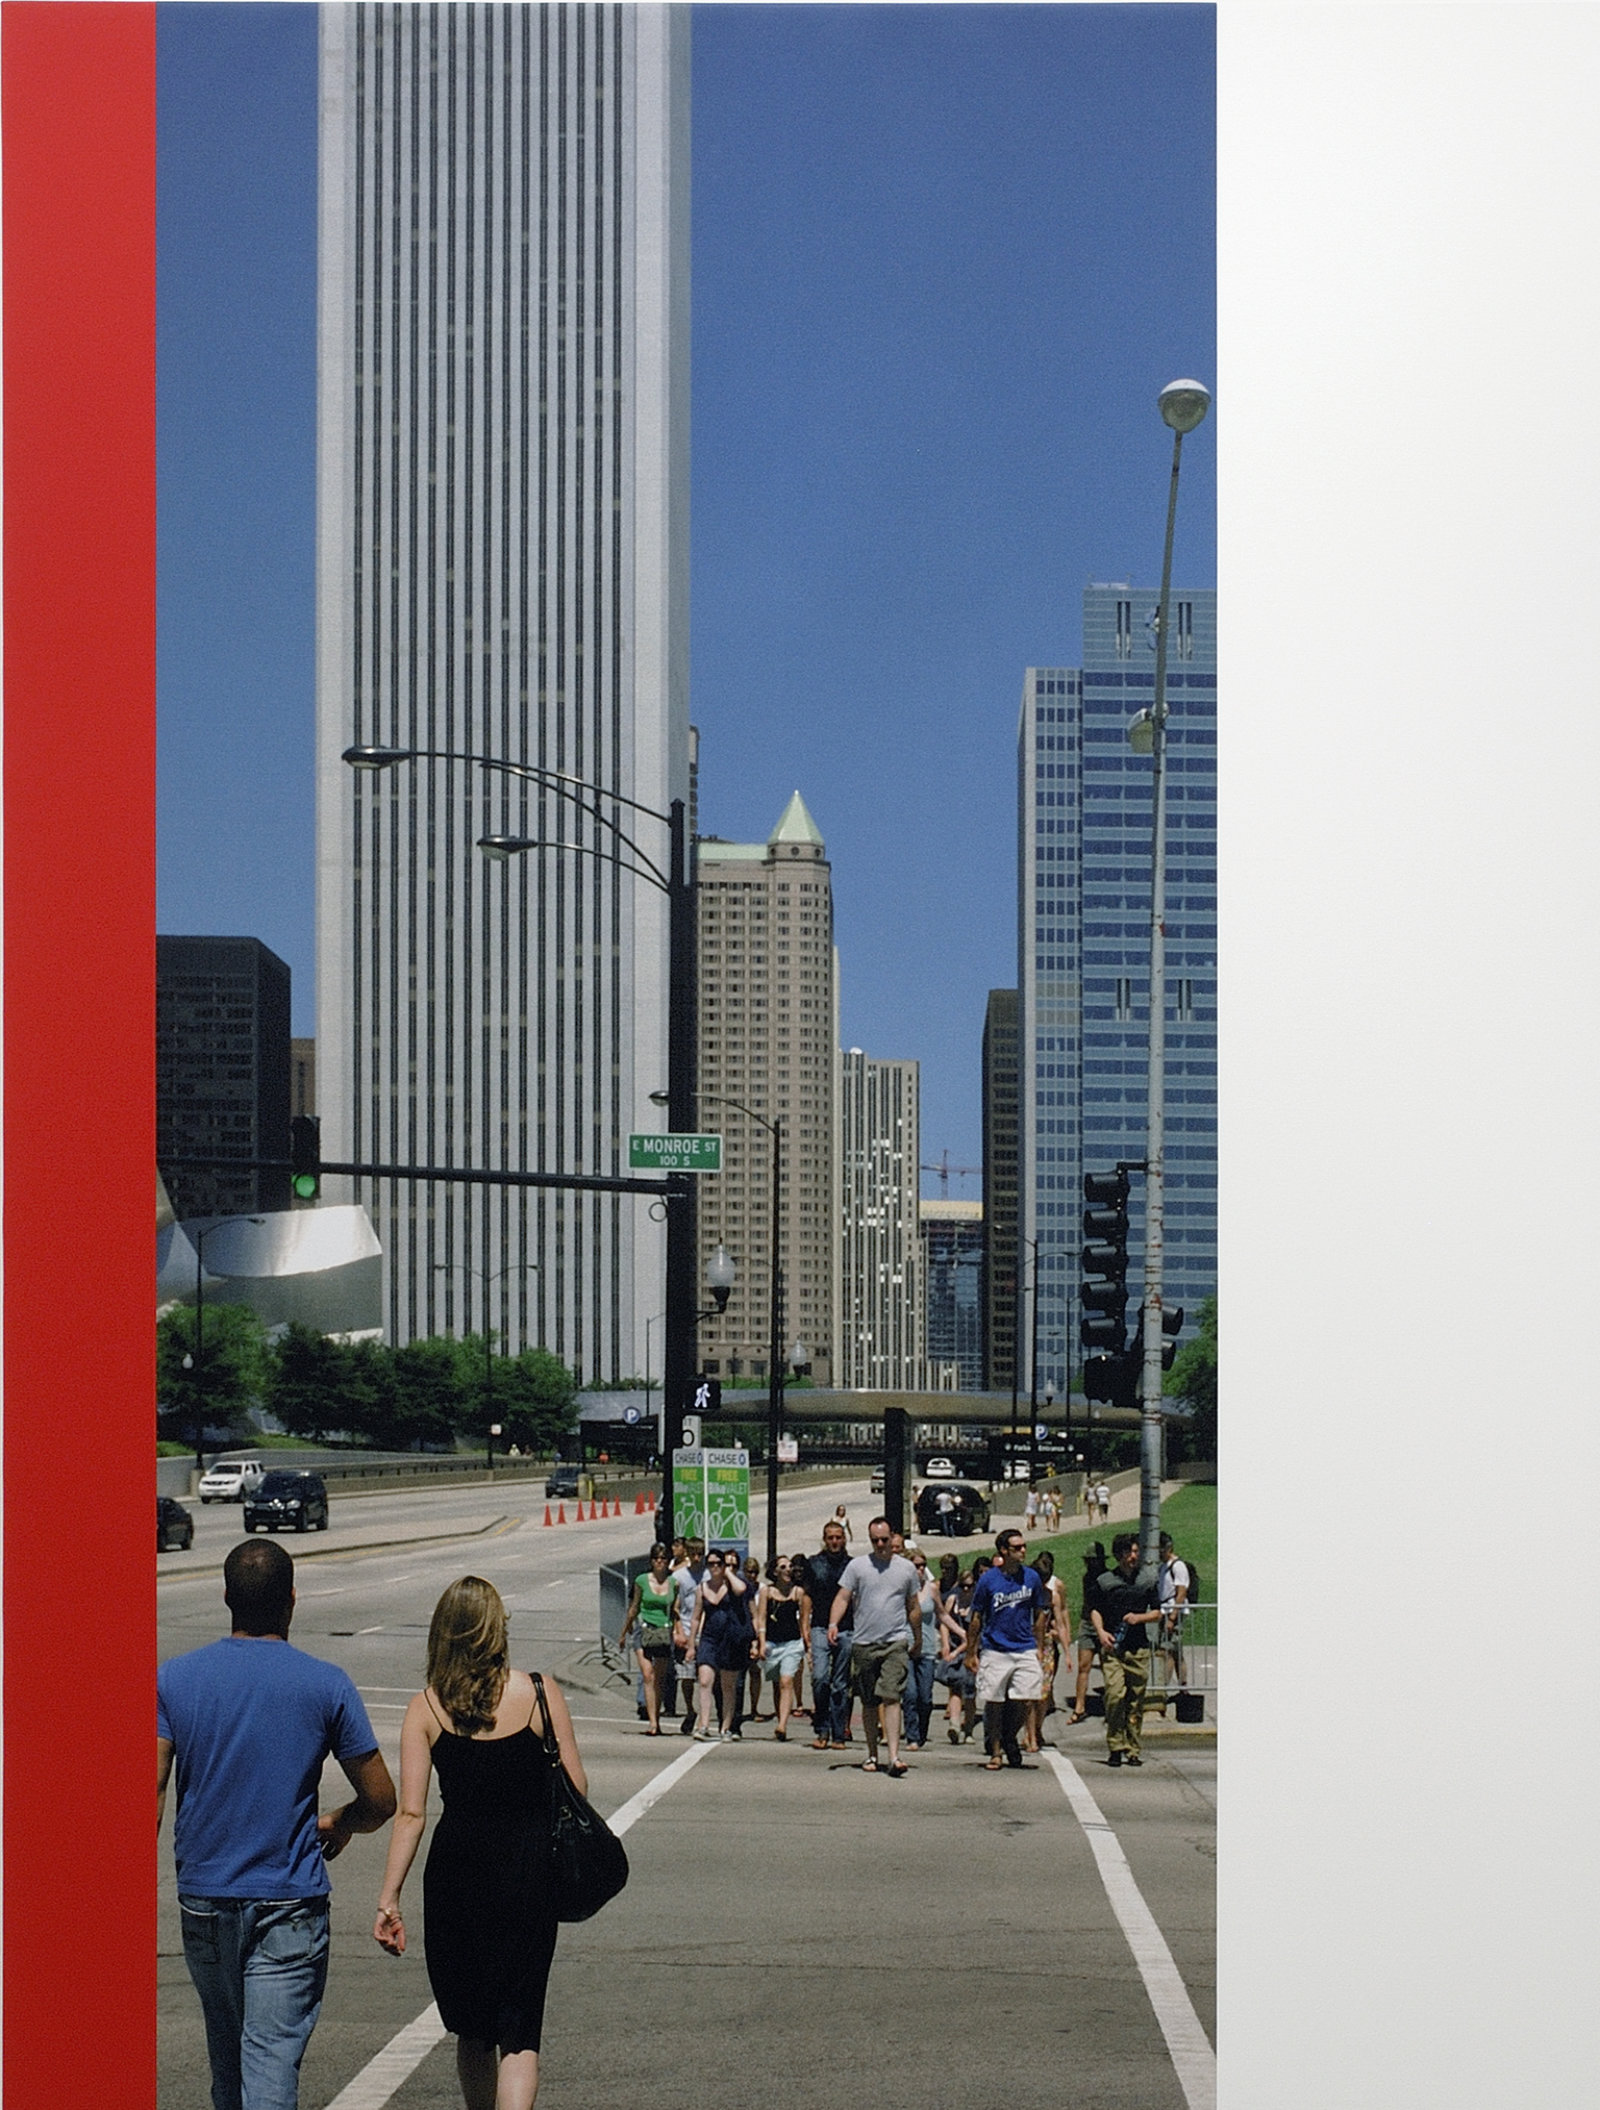 Ian Wallace, Chicago Crosswalk, 2007, photolaminate and acrylic on canvas, 96 x 72 in. (244 x 183 cm)